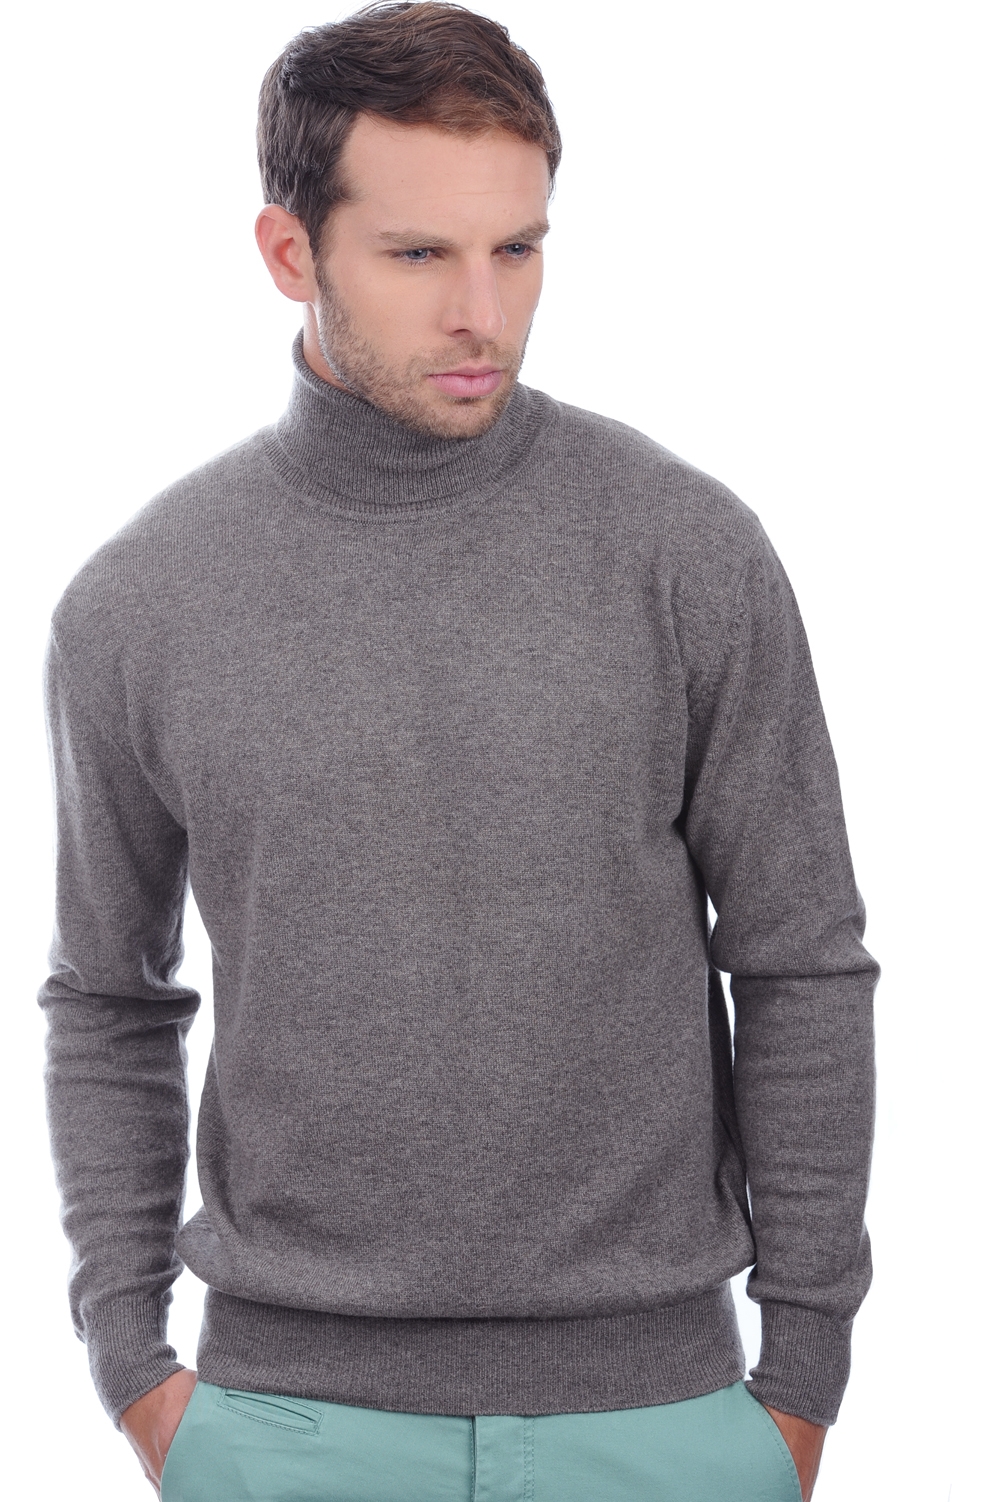 Cachemire pull homme edgar marmotte chine m